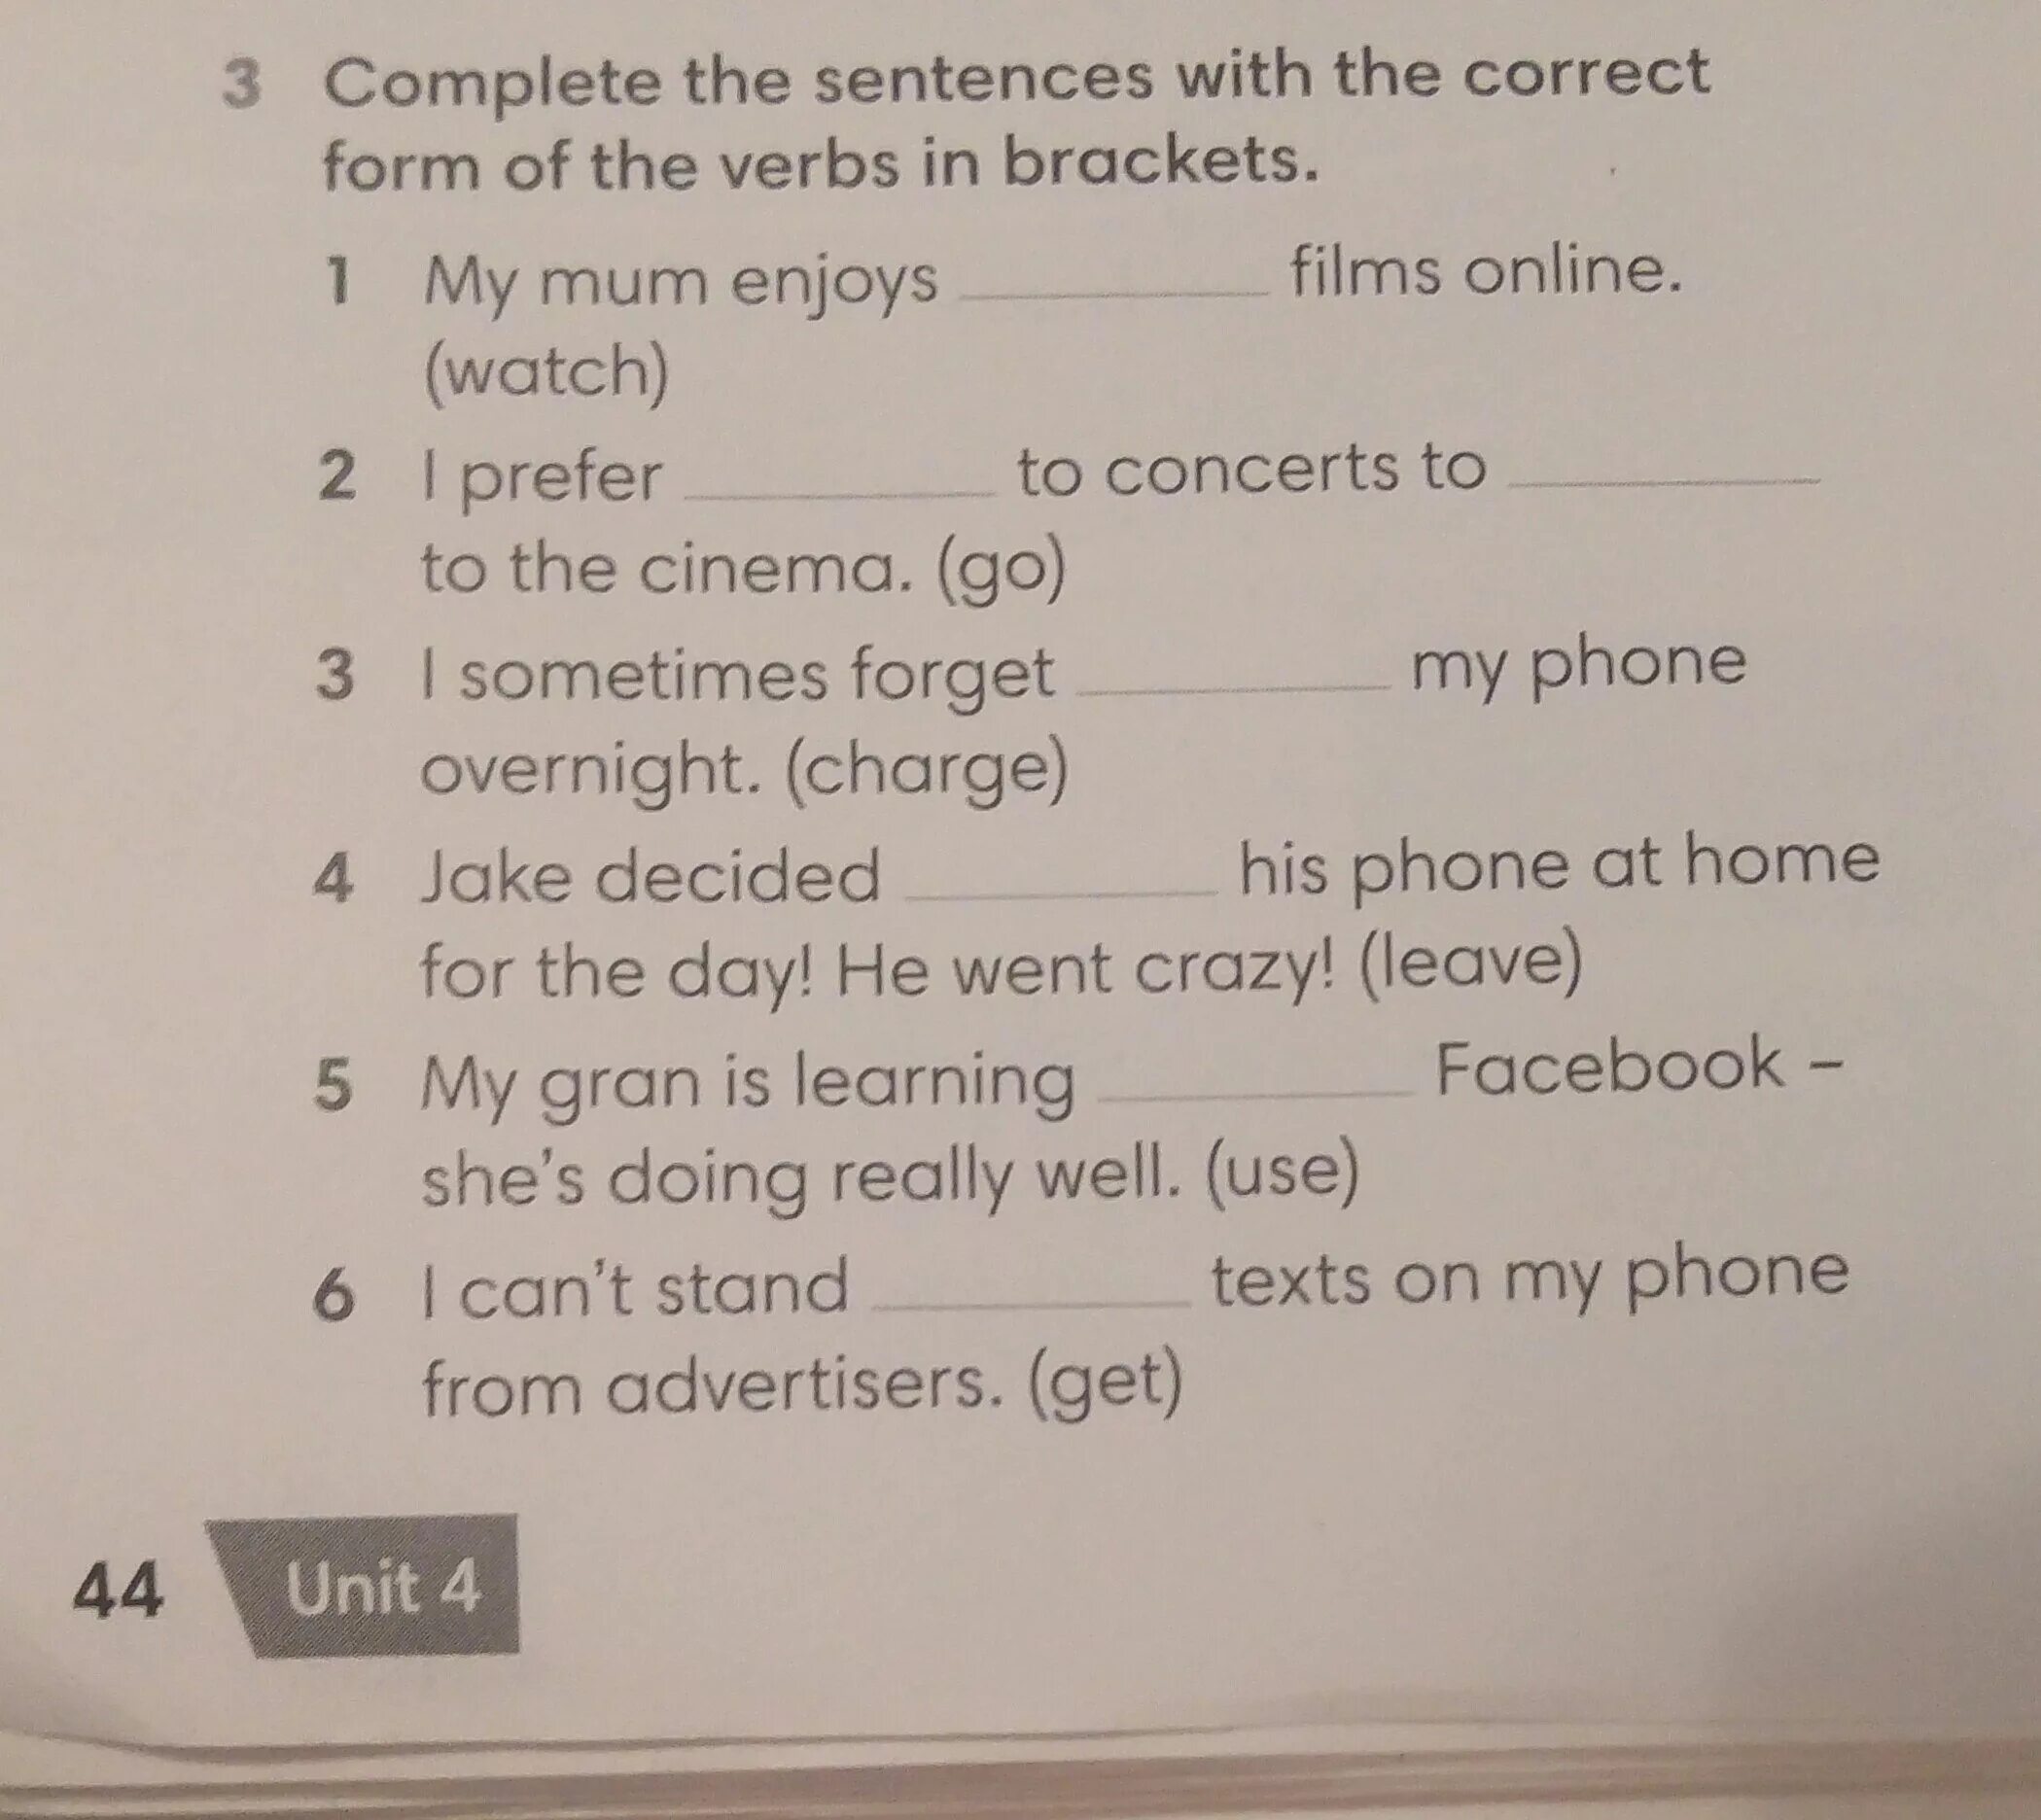 Complete the sentences with correct forms. Complete the sentences with the correct form of the verbs. Complete the sentences with the correct form of the verbs in Brackets. Complete the sentences with the correct form of the verbs in Brackets ответы. Complete the sentences with the verbs in the correct form.